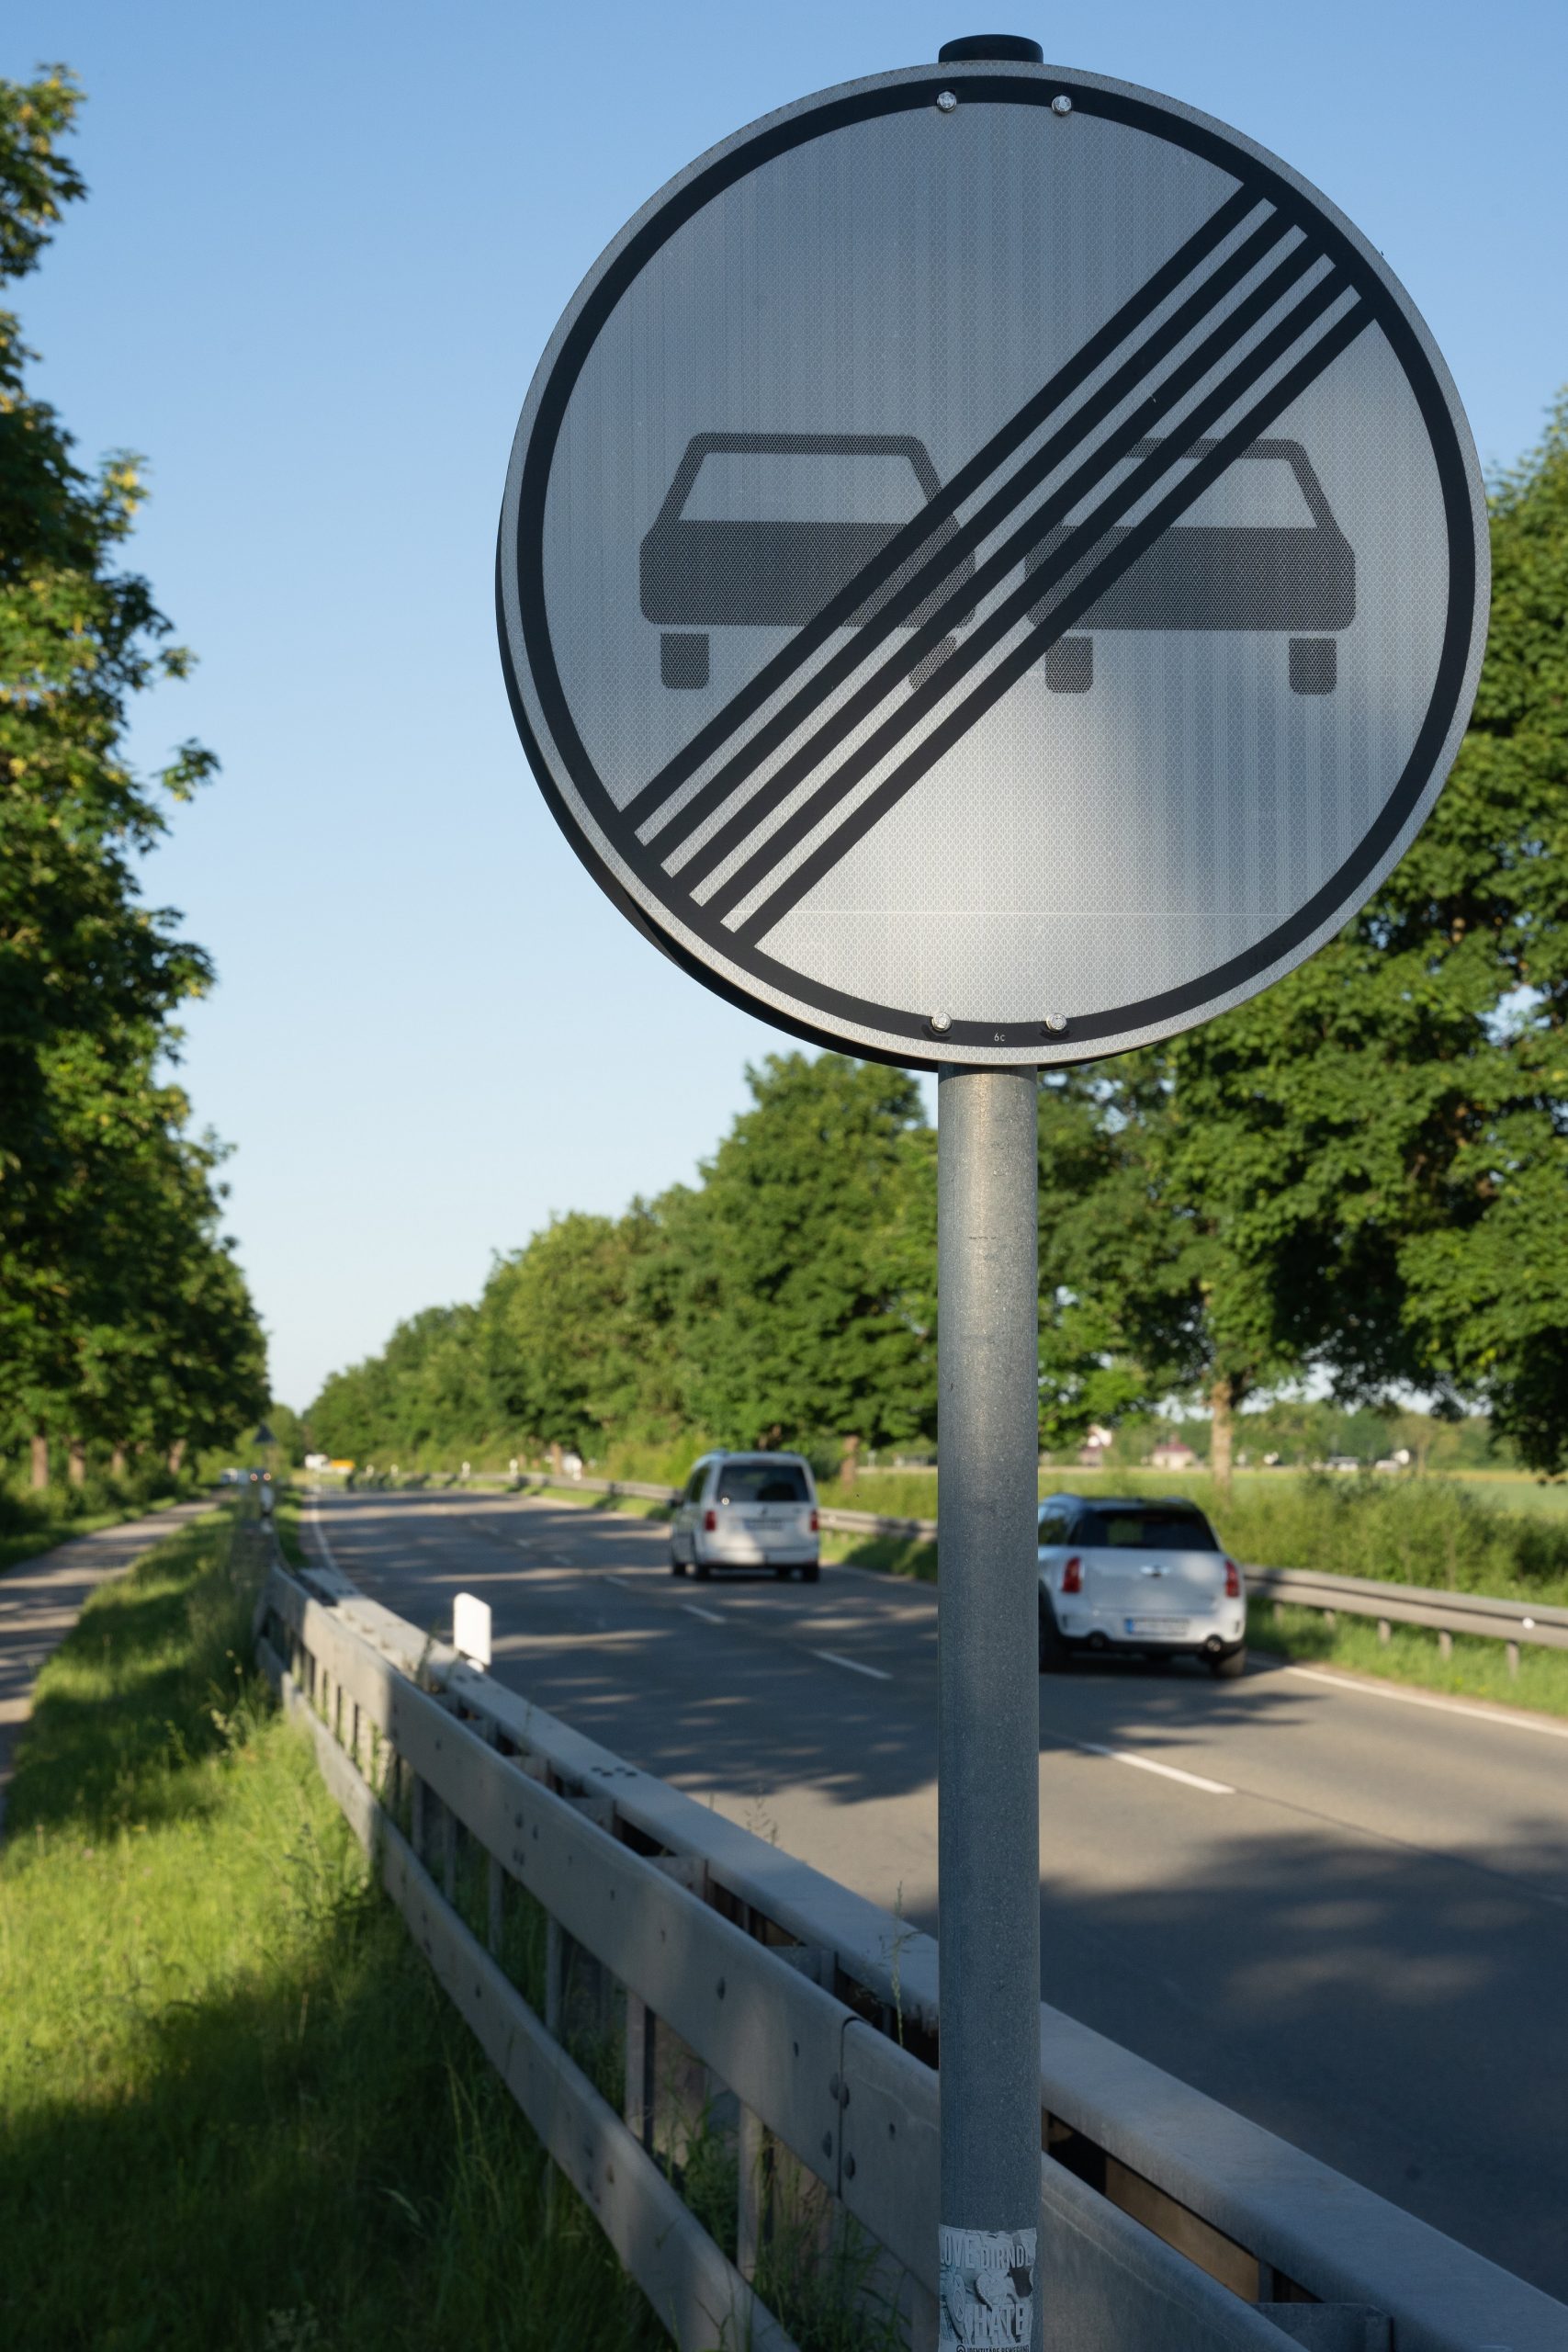 An Autobahn road sign indicating the lifting of highway restrictions in Germany